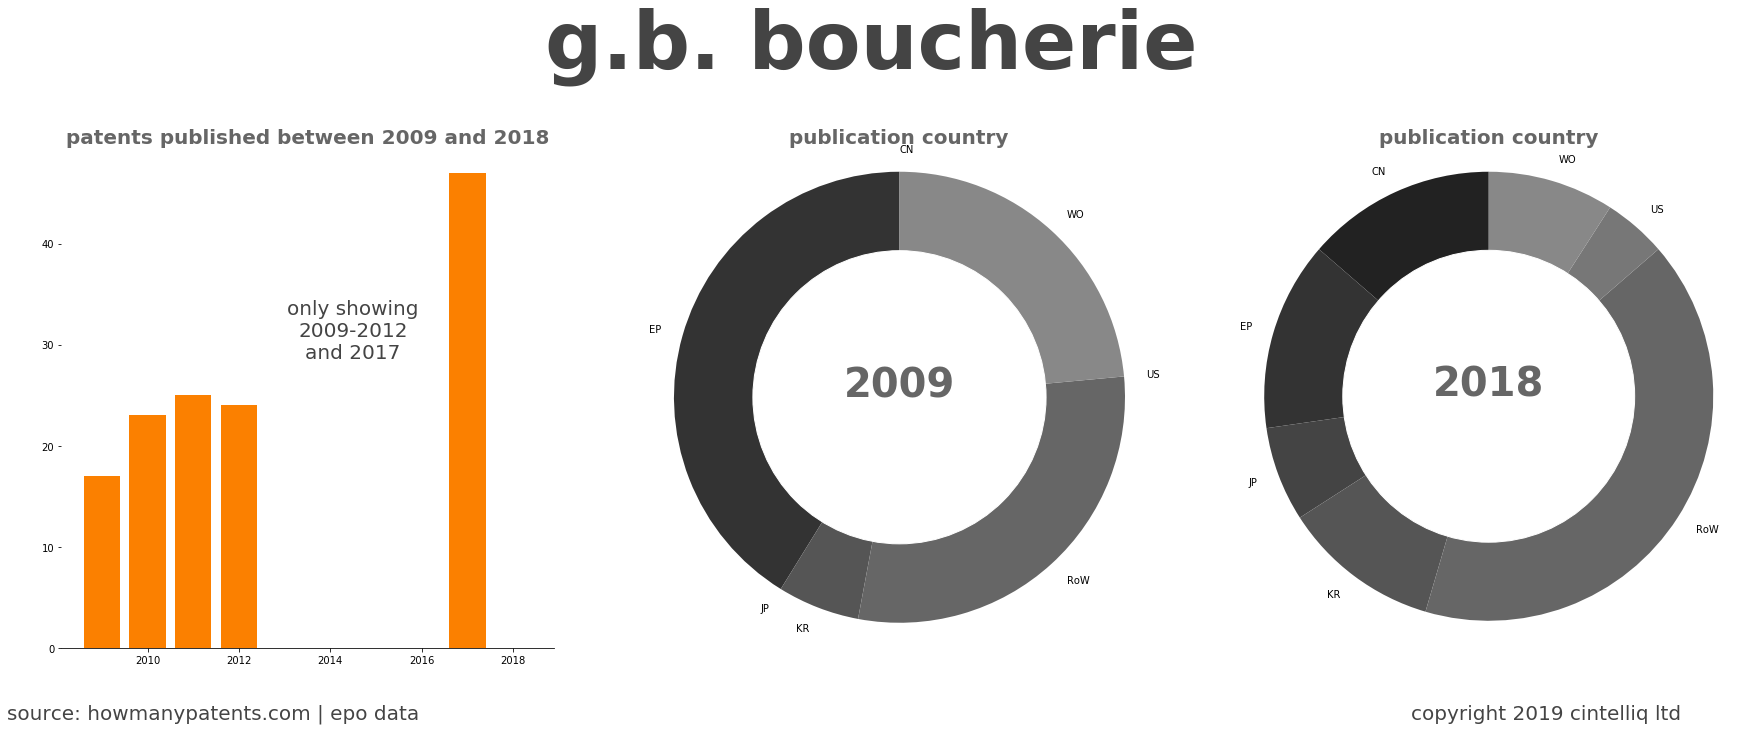 summary of patents for G.B. Boucherie